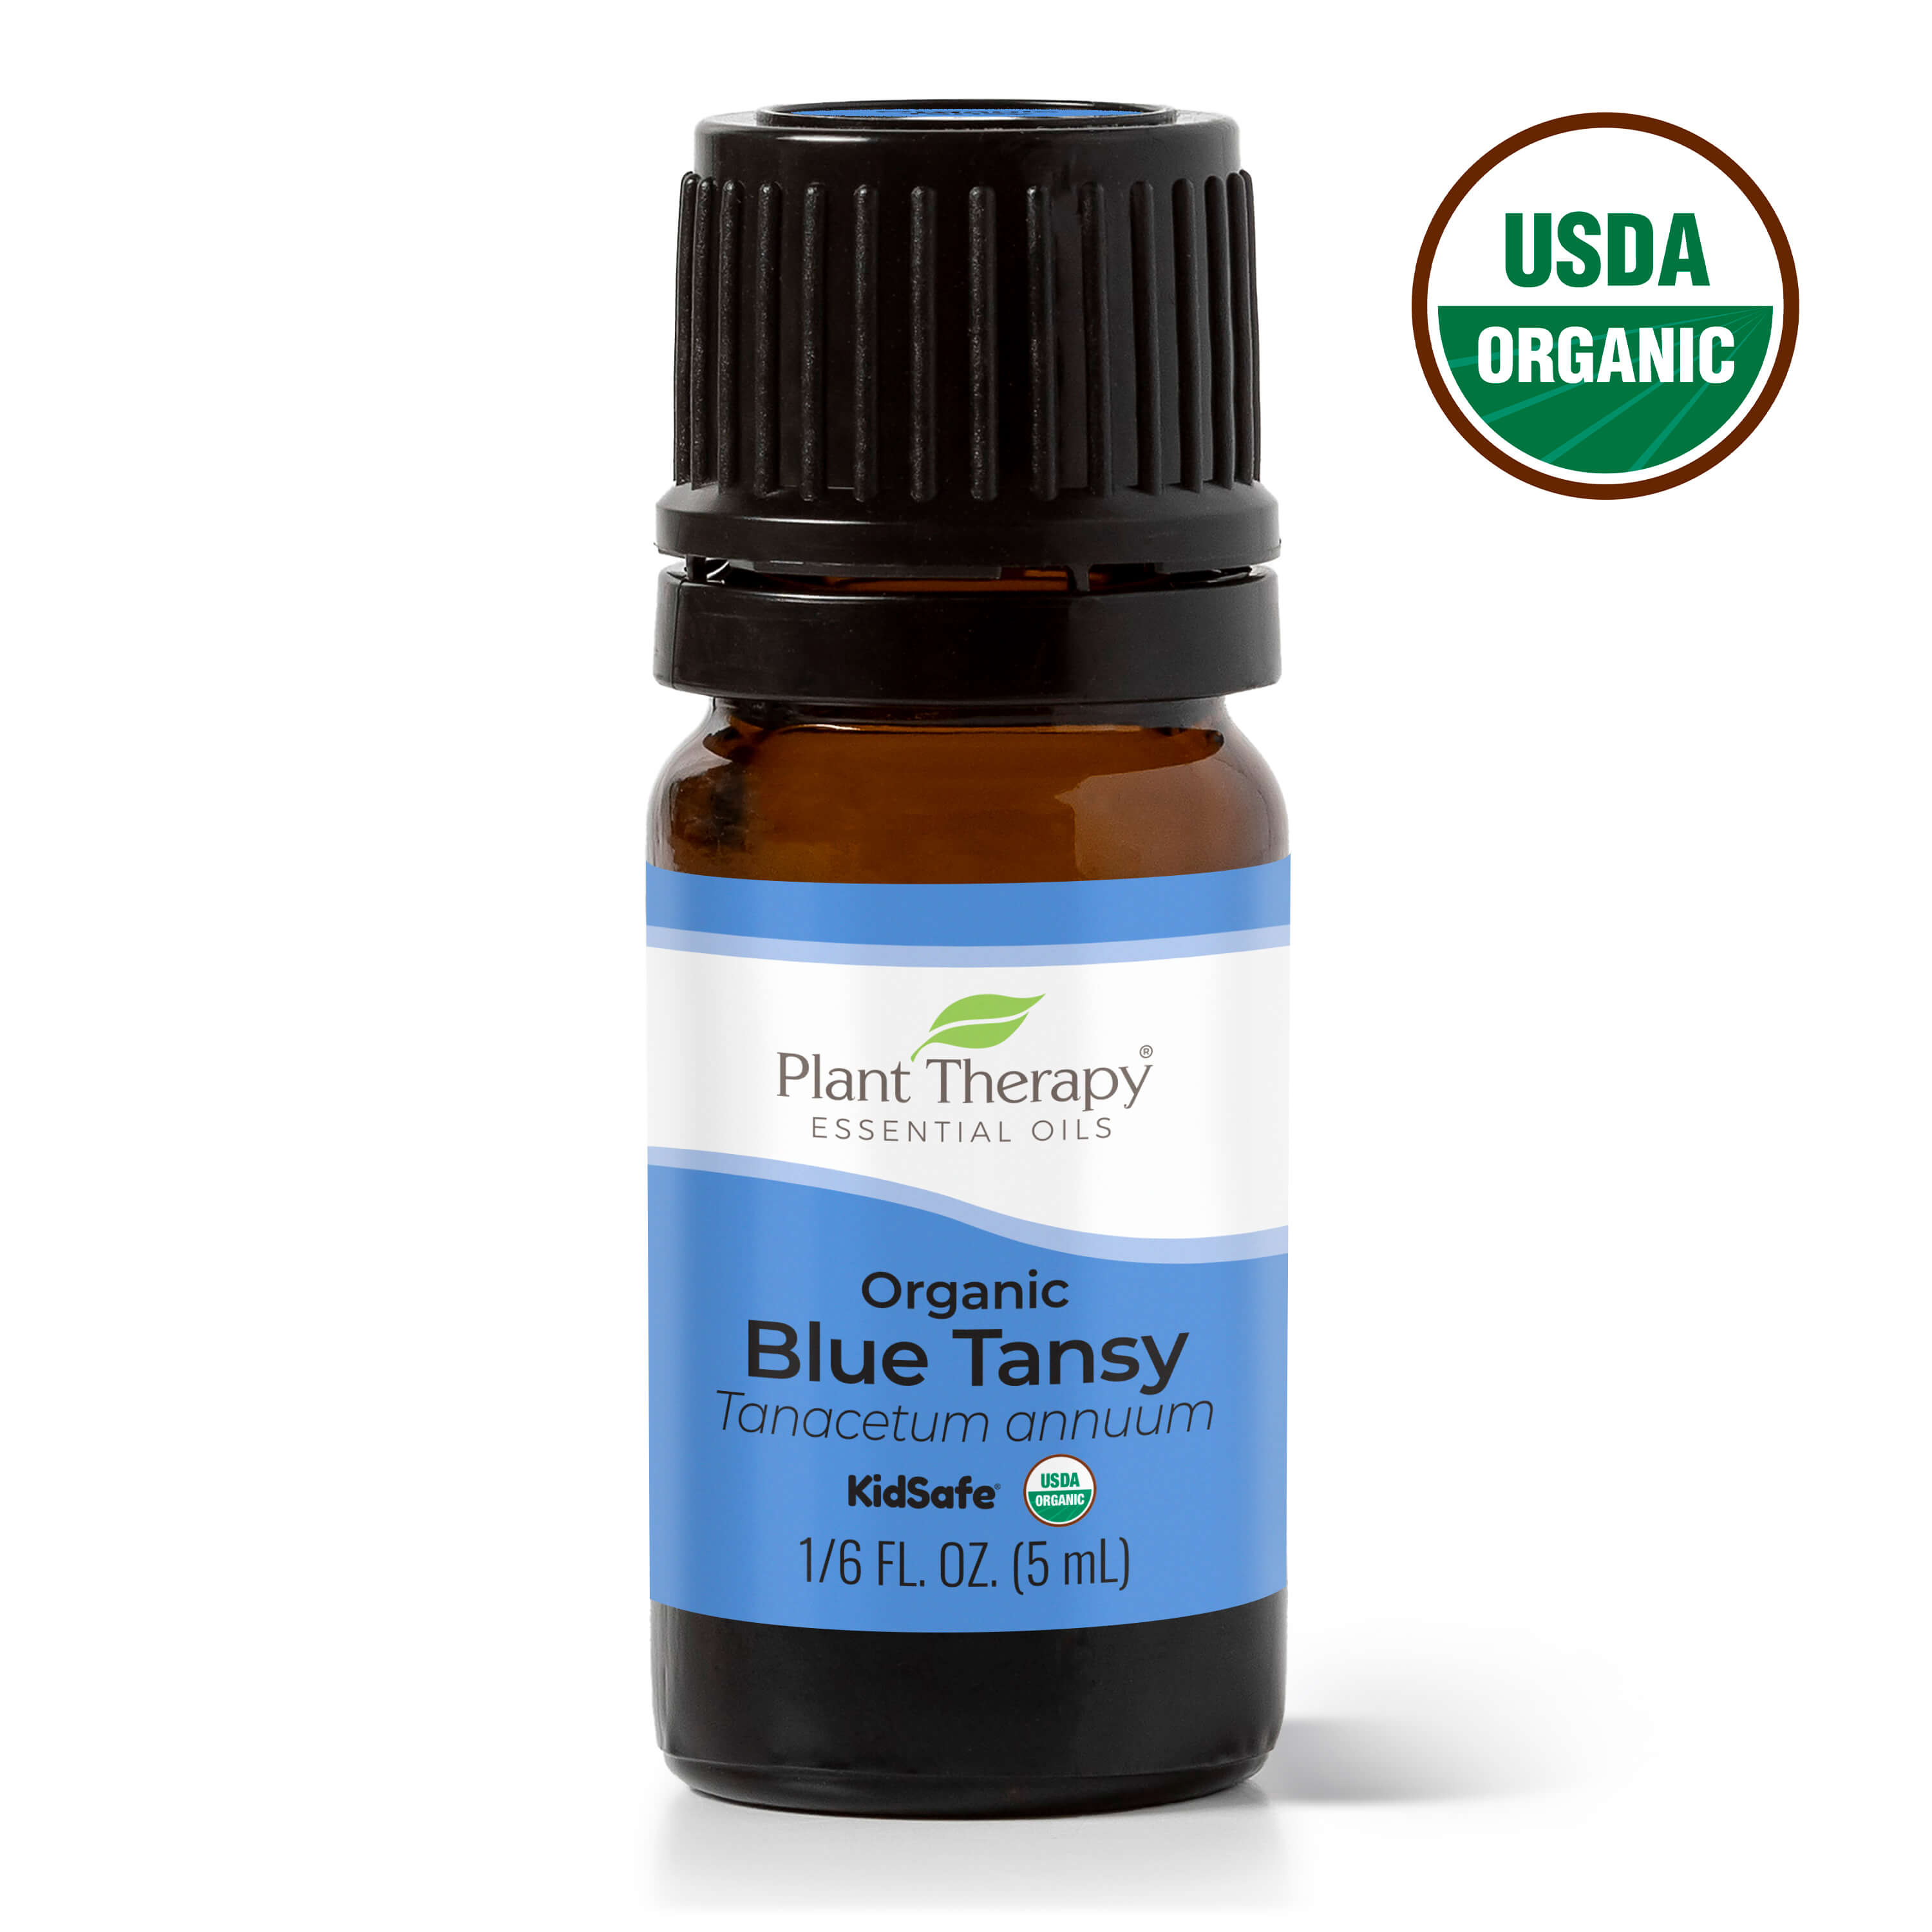 Plant Therapy Organic Blue Tansy Essential Oil 100% Pure, Undiluted, Natural Aromatherapy, Therapeutic Grade 5mL (1/6 oz) - image 1 of 7